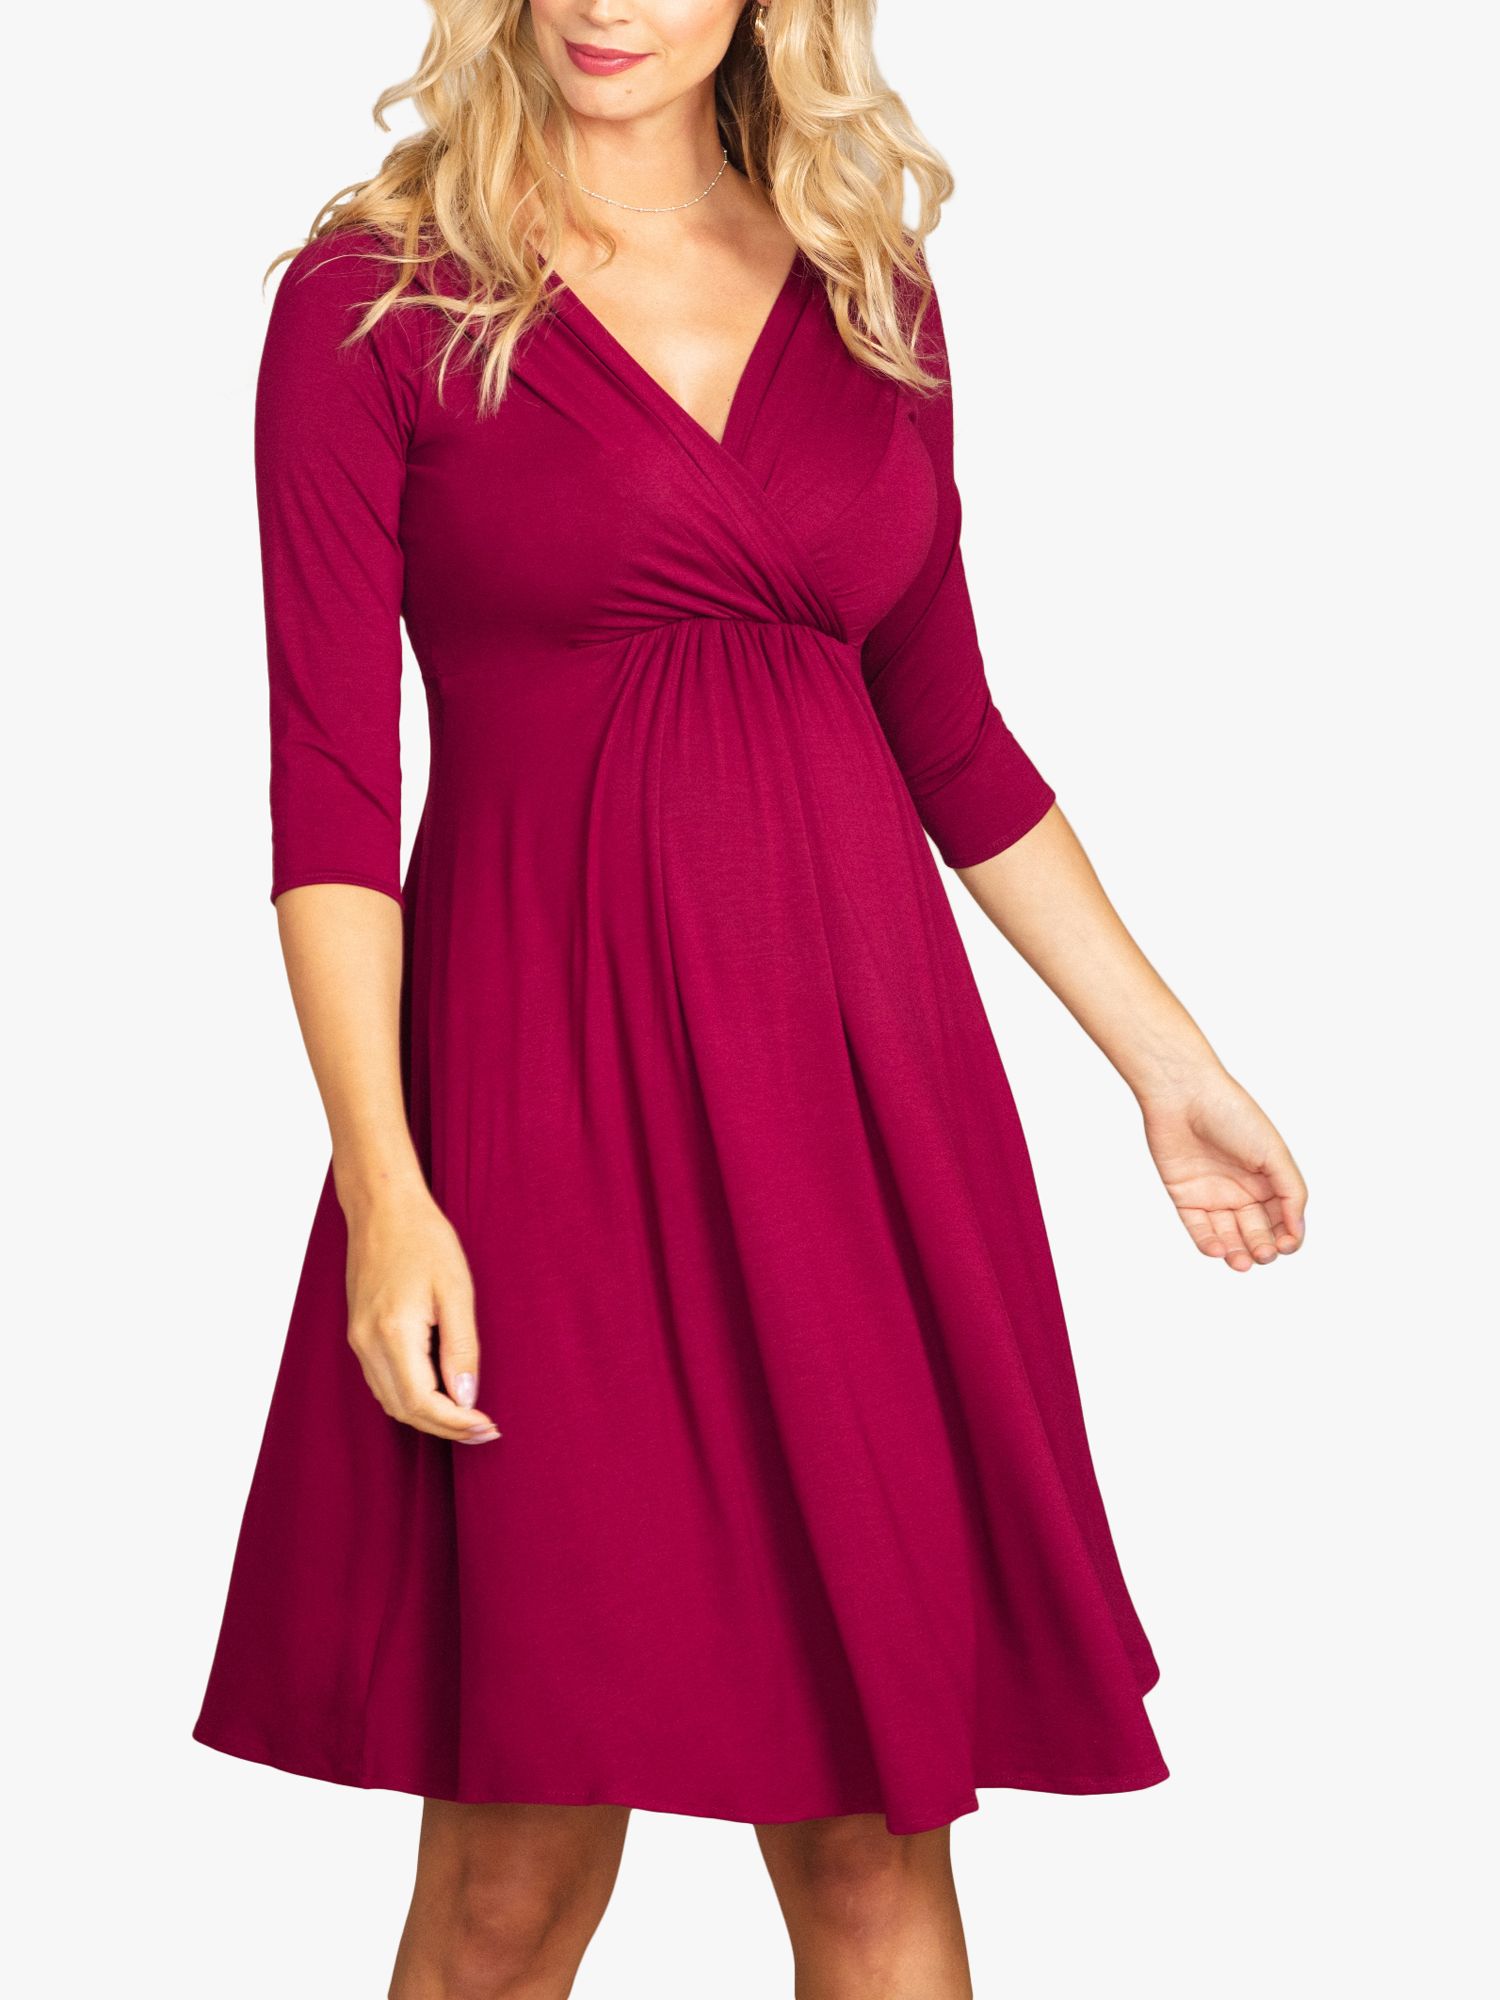 Buy Tiffany Rose Willow Maternity Dress Online at johnlewis.com